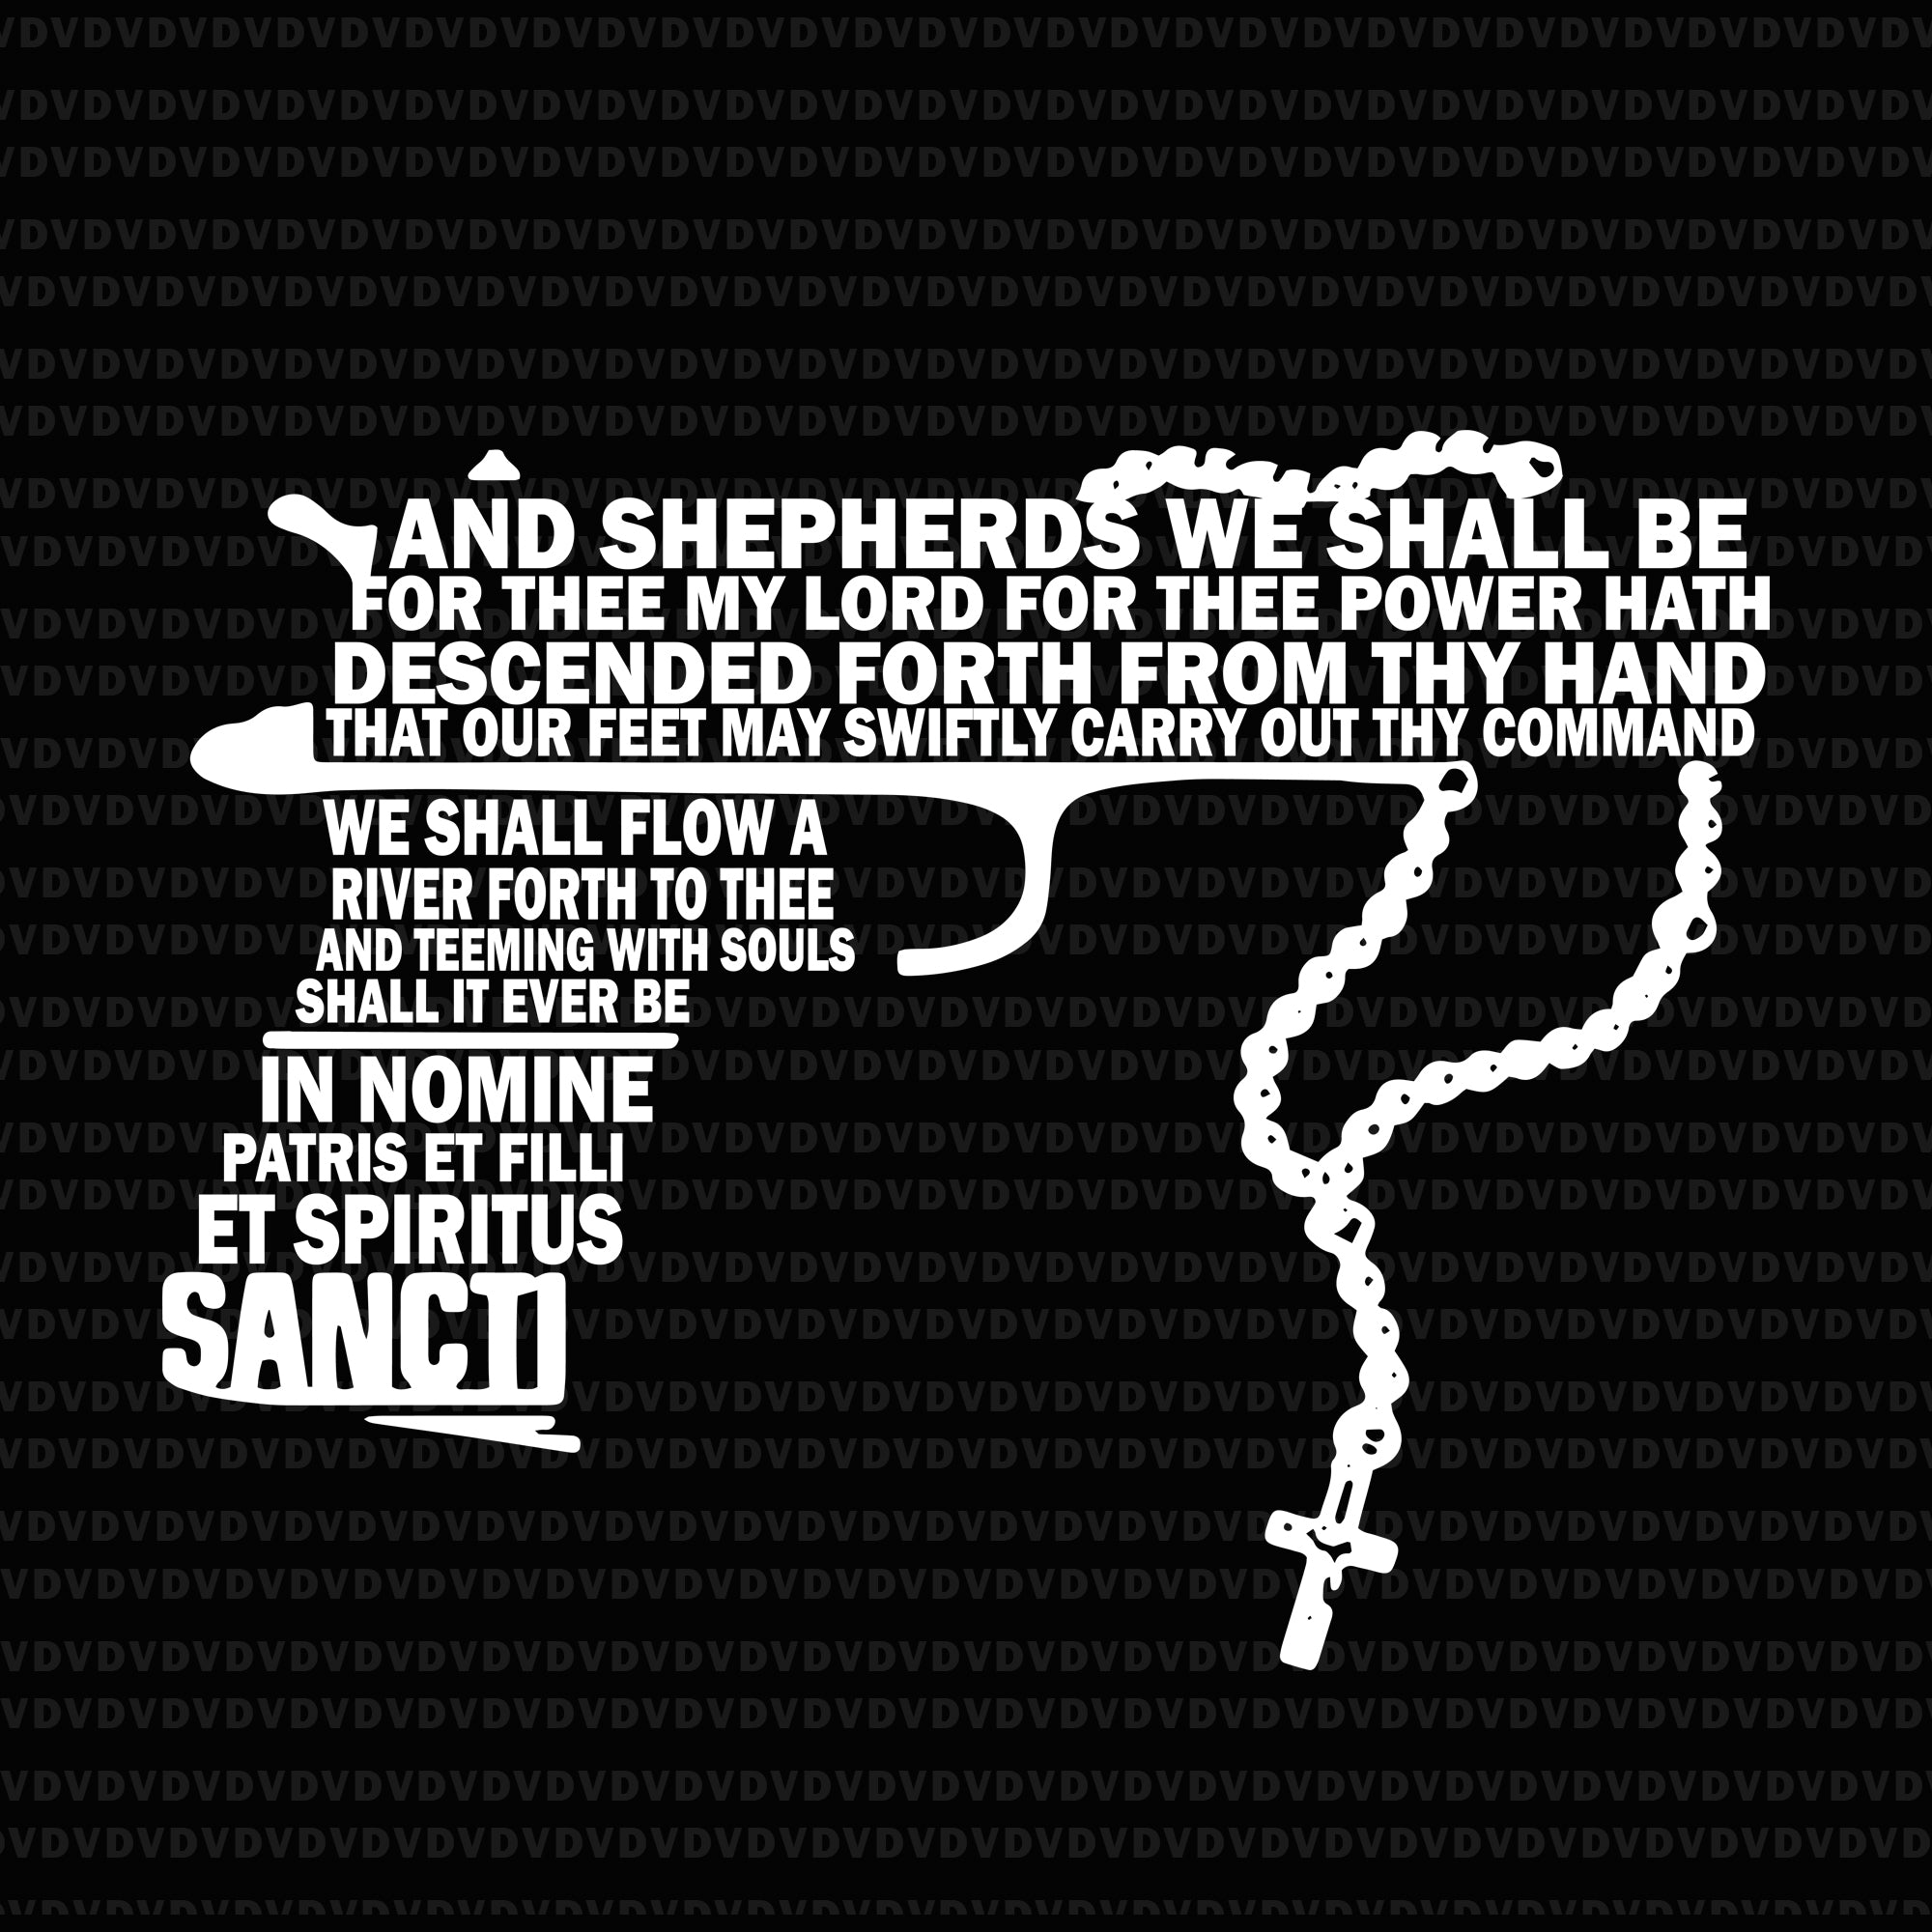 Download And Shepherds We Shall Be For Thee My Lord Gun Svg And Shepherds We S Buydesigntshirt